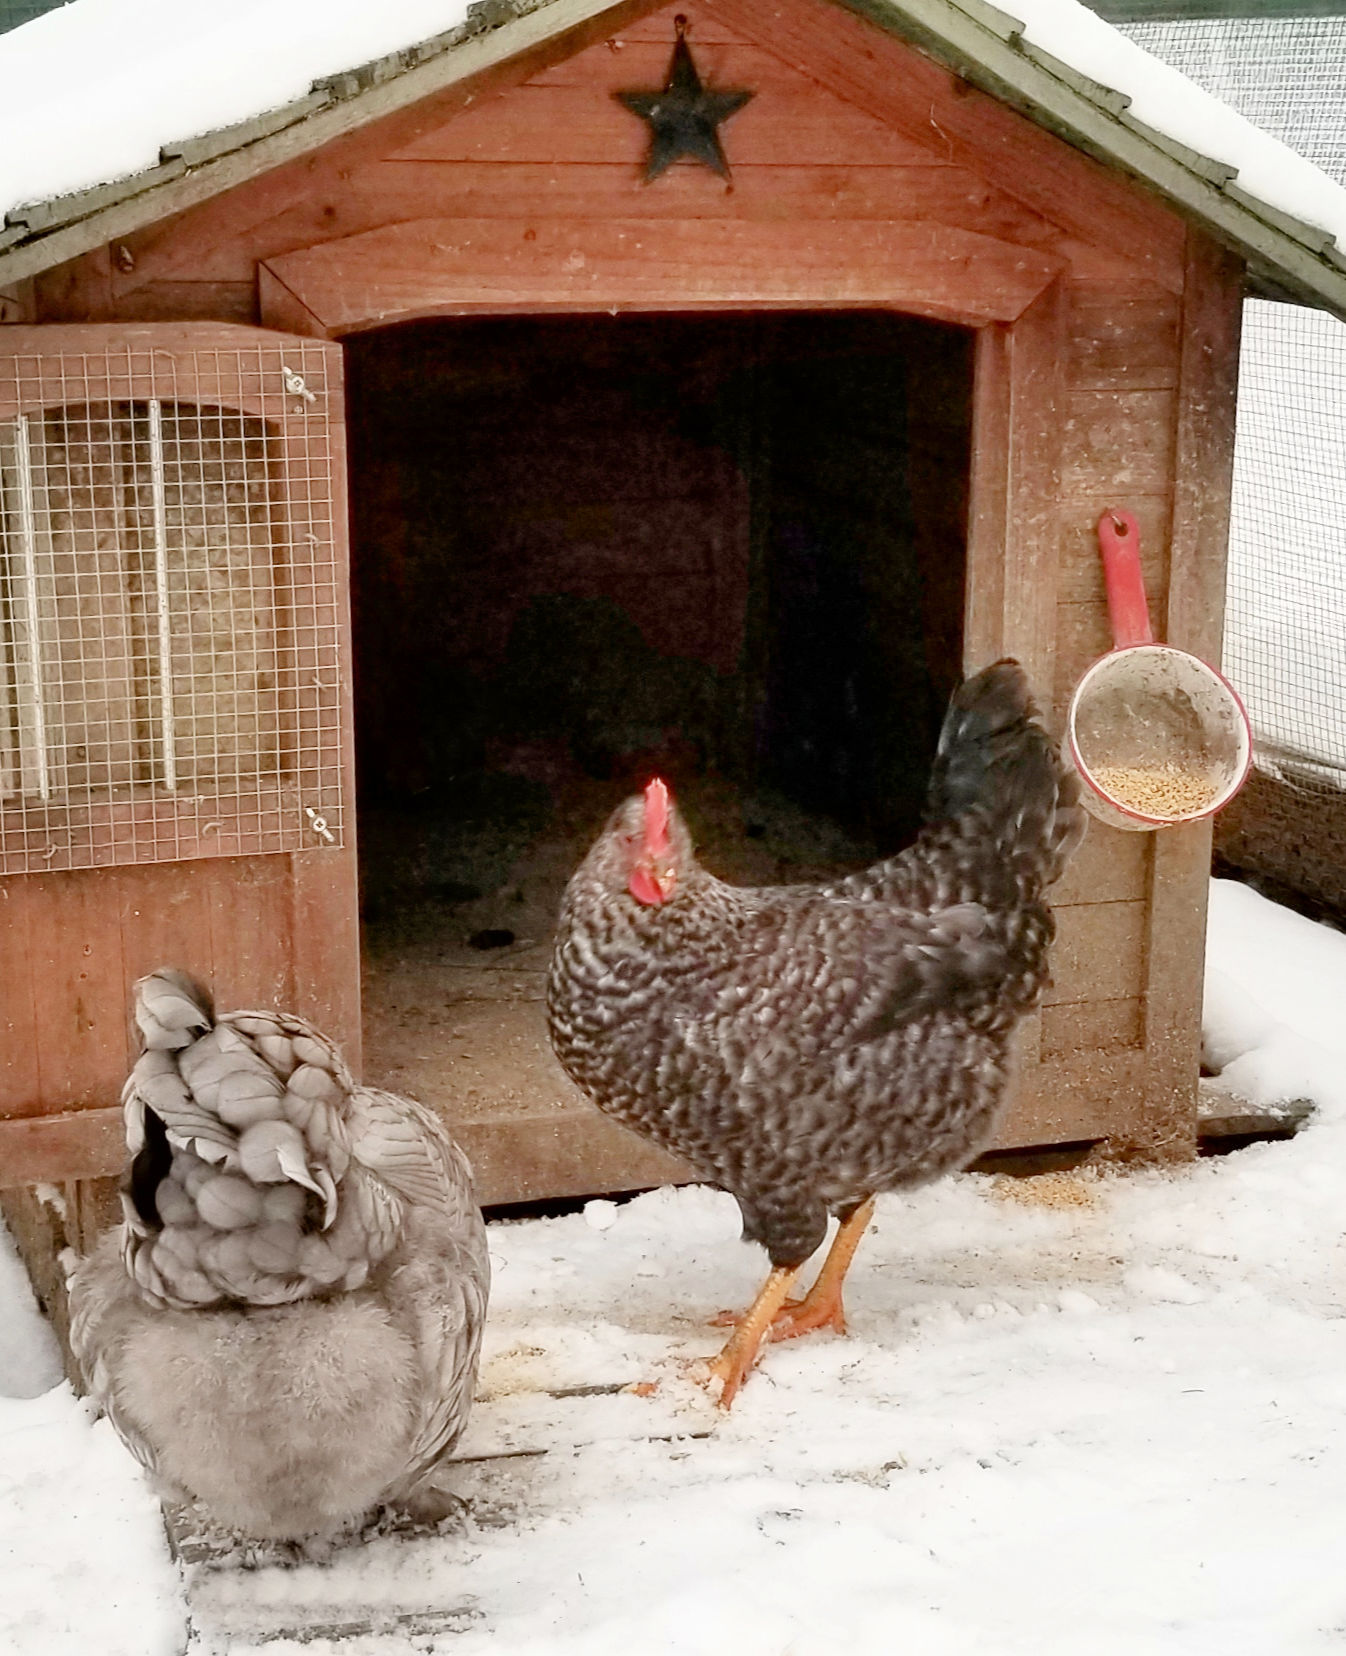 Top tips for raising chickens in cold weather